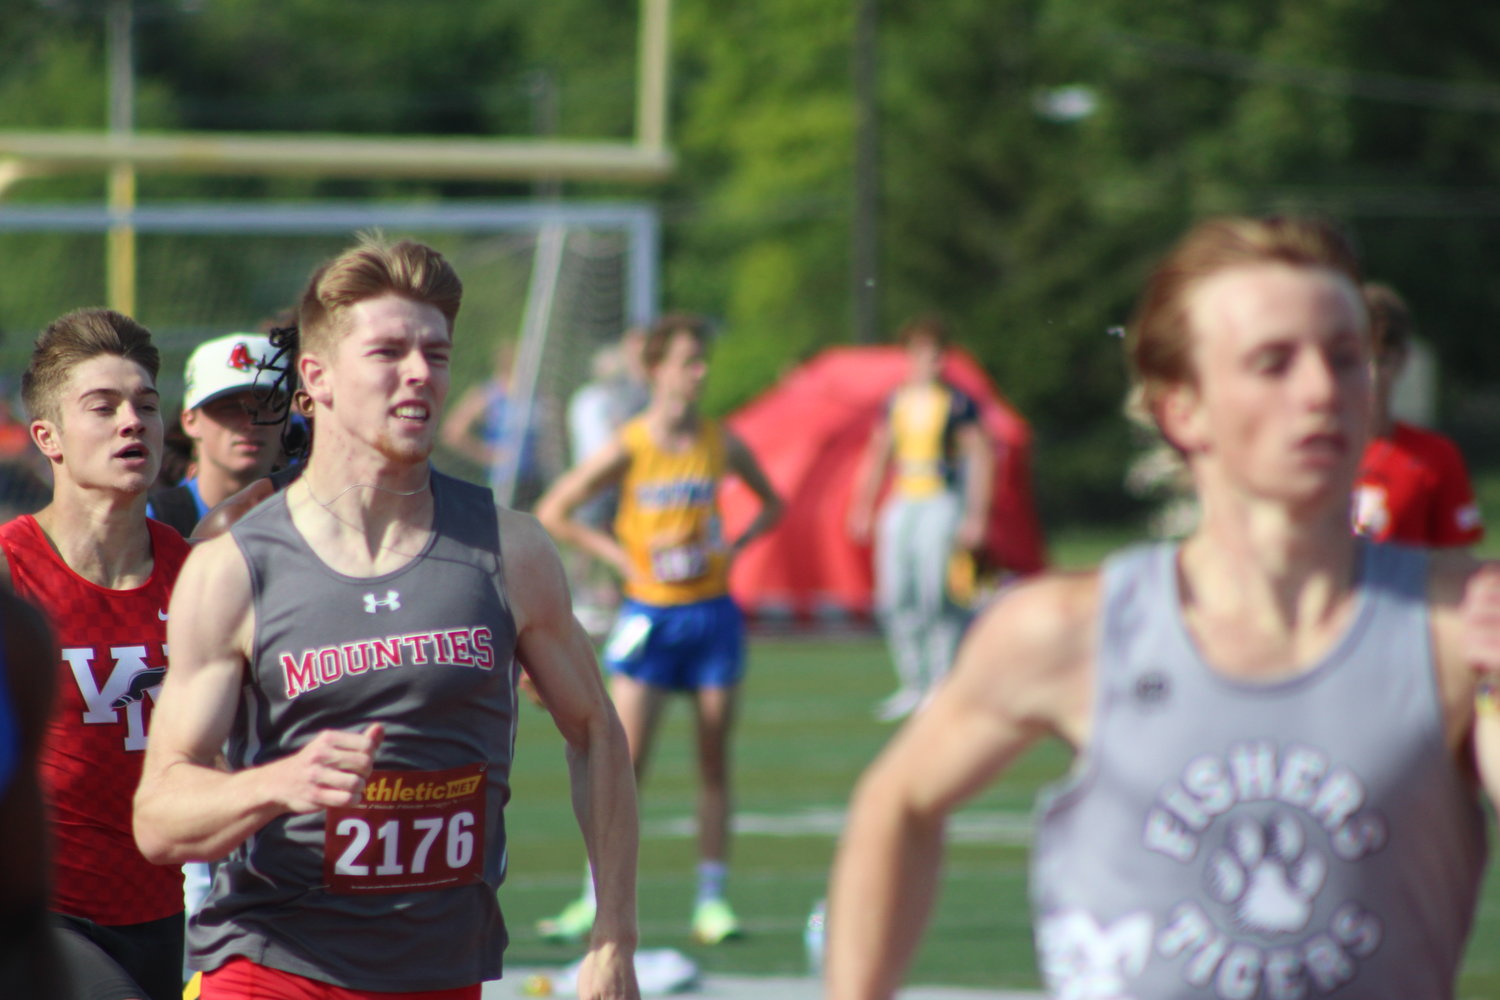 Southmont's Trent Jones stellar track career came to an end on Saturday at the Lafayette Jeff Regional where he placed 5th in the 400M Dash with a time of 50.14